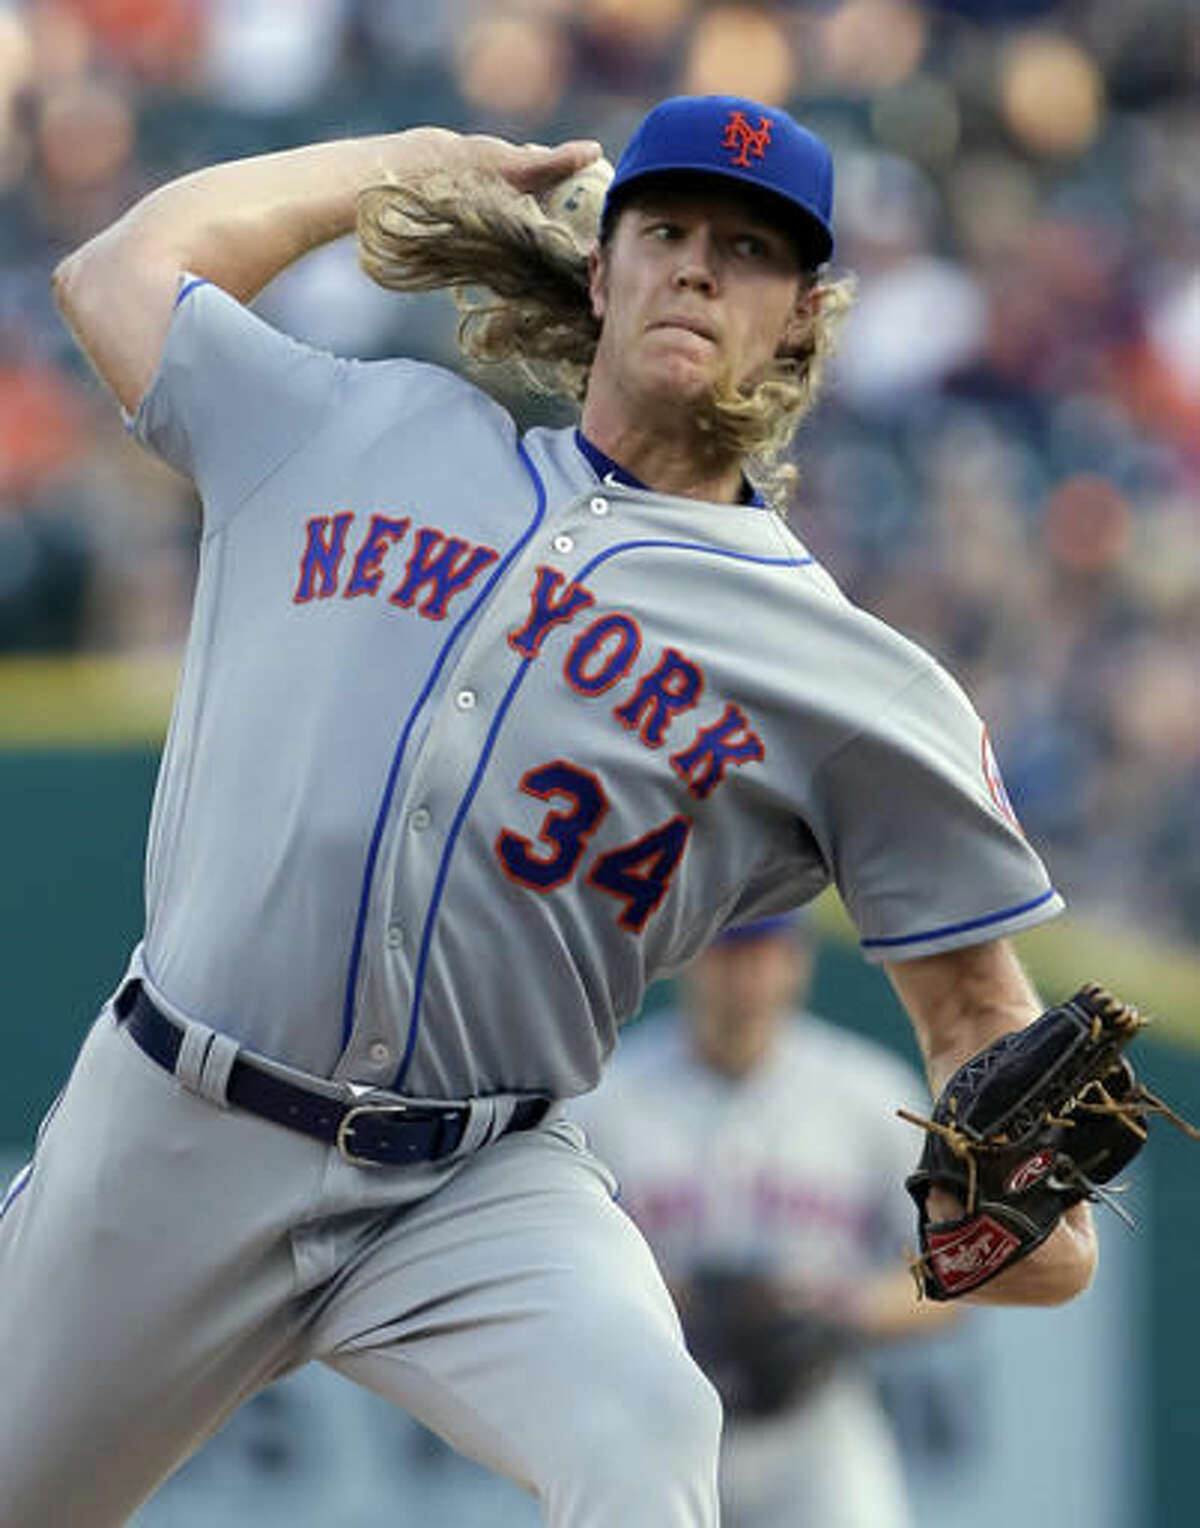 New York Mets' Noah Syndergaard pitches against the Detroit Tigers during the first inning of an interleague baseball game Friday, Aug. 5, 2016, in Detroit. (AP Photo/Duane Burleson)